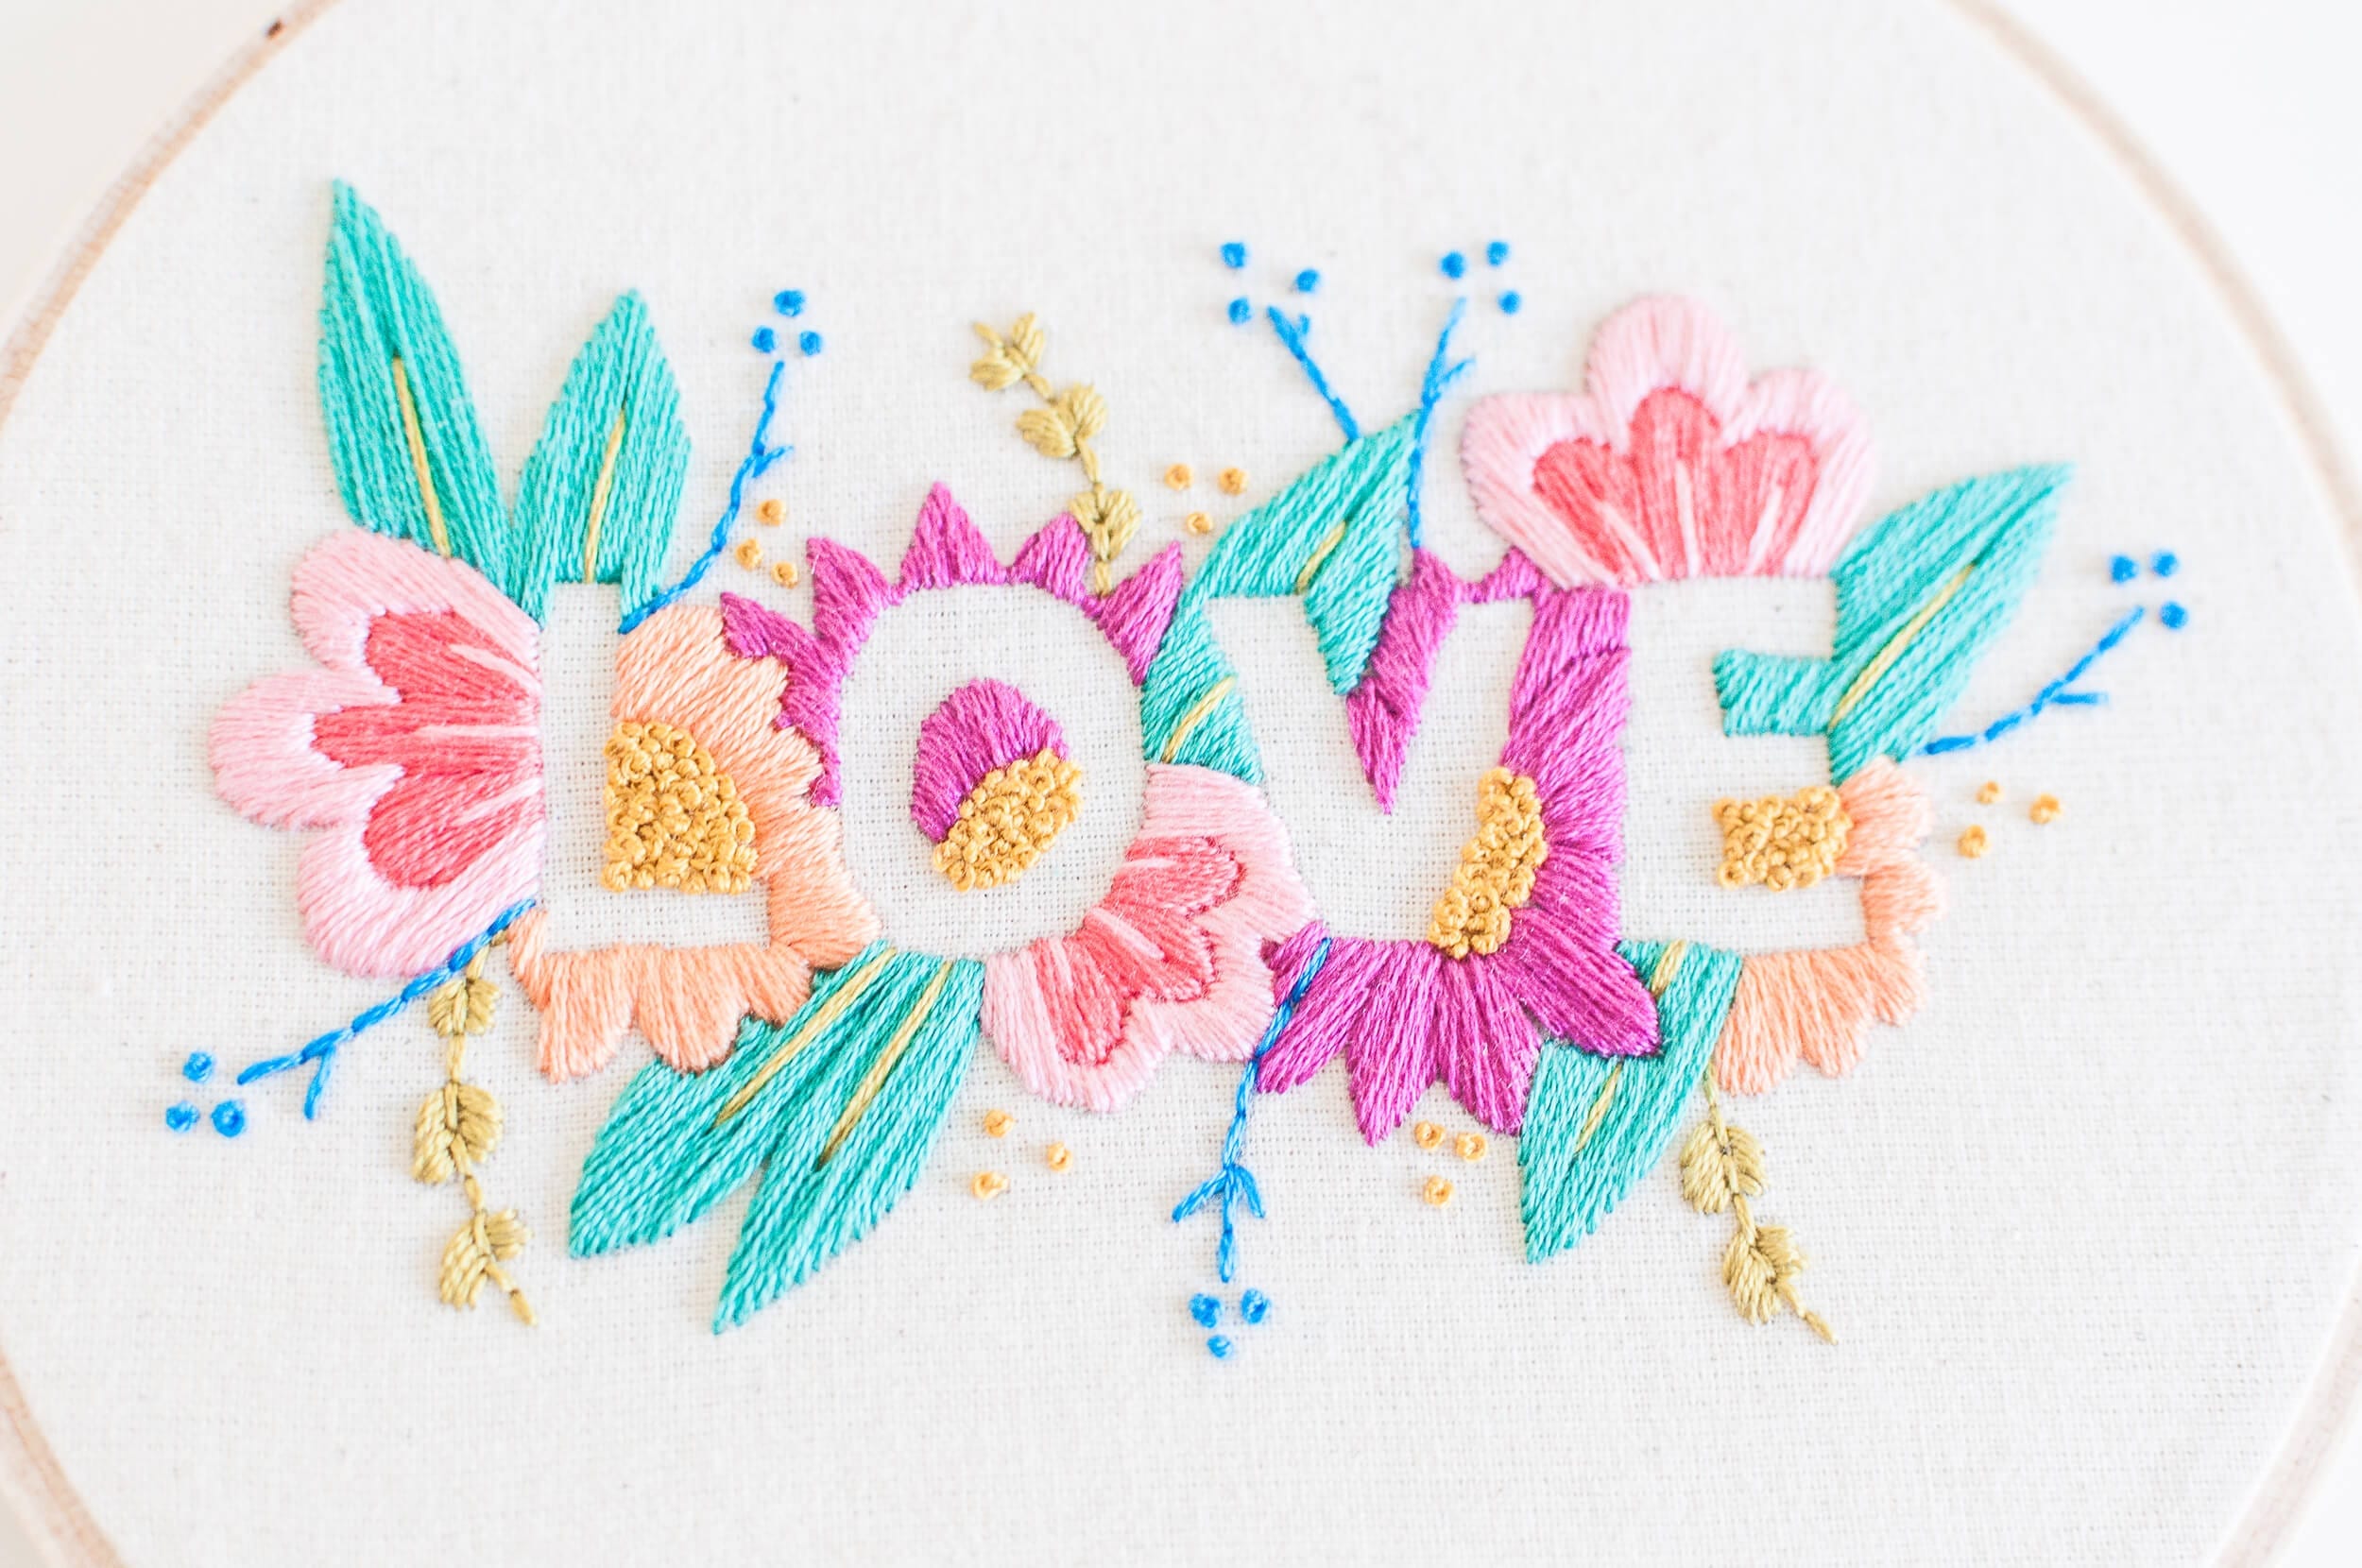 LOVE Embroidery Kit - Brynn & Co.